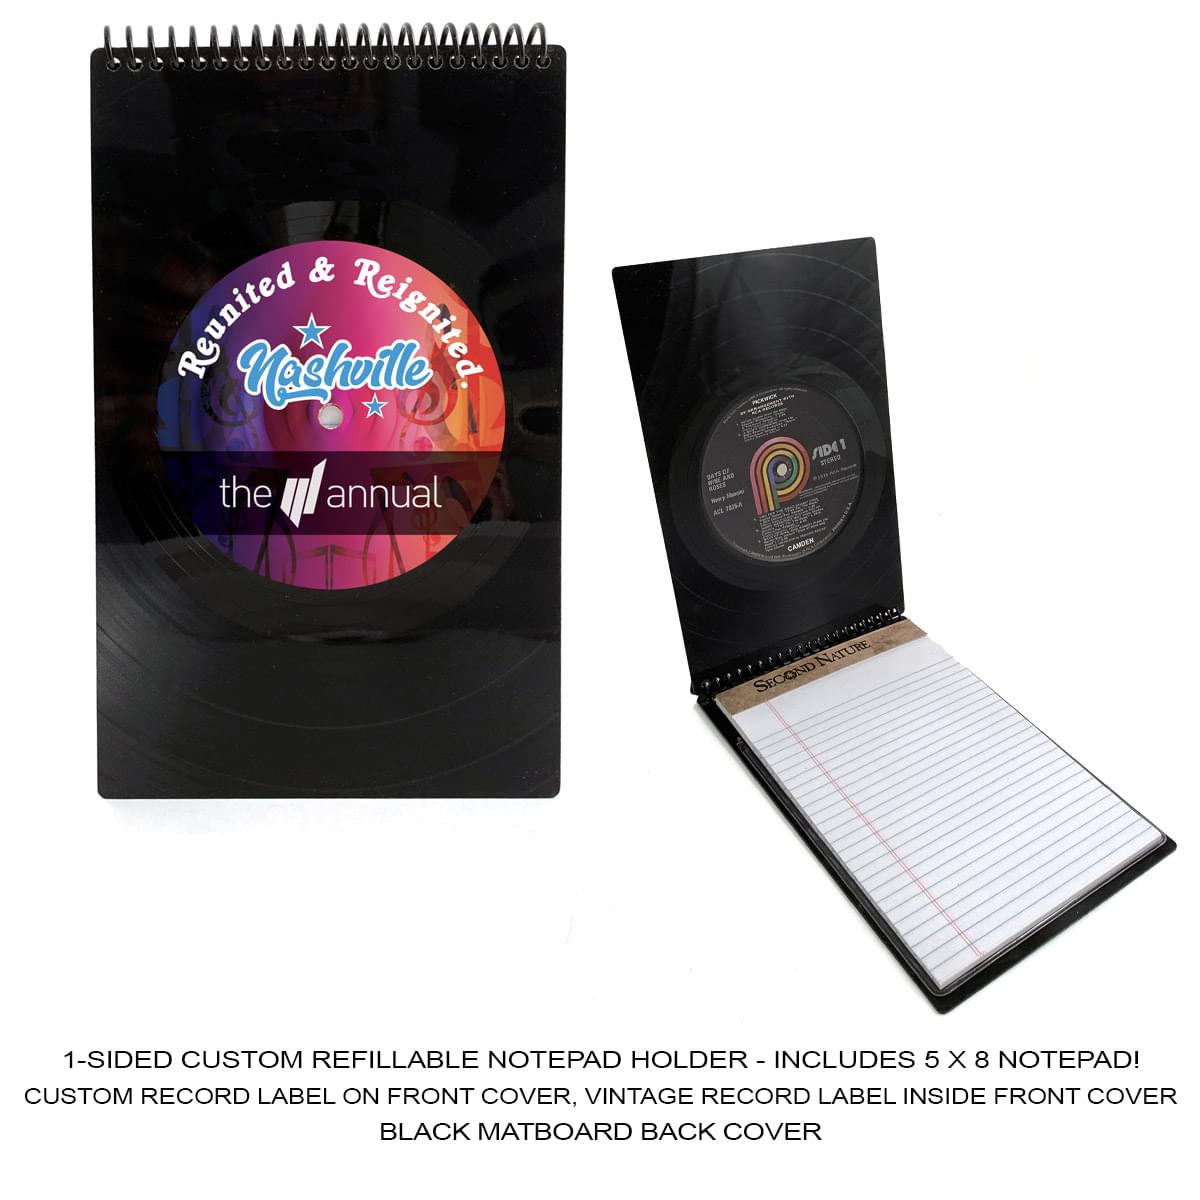 Refillable Recycled Vinyl Record Notepad Holder - 1-Sided Custom